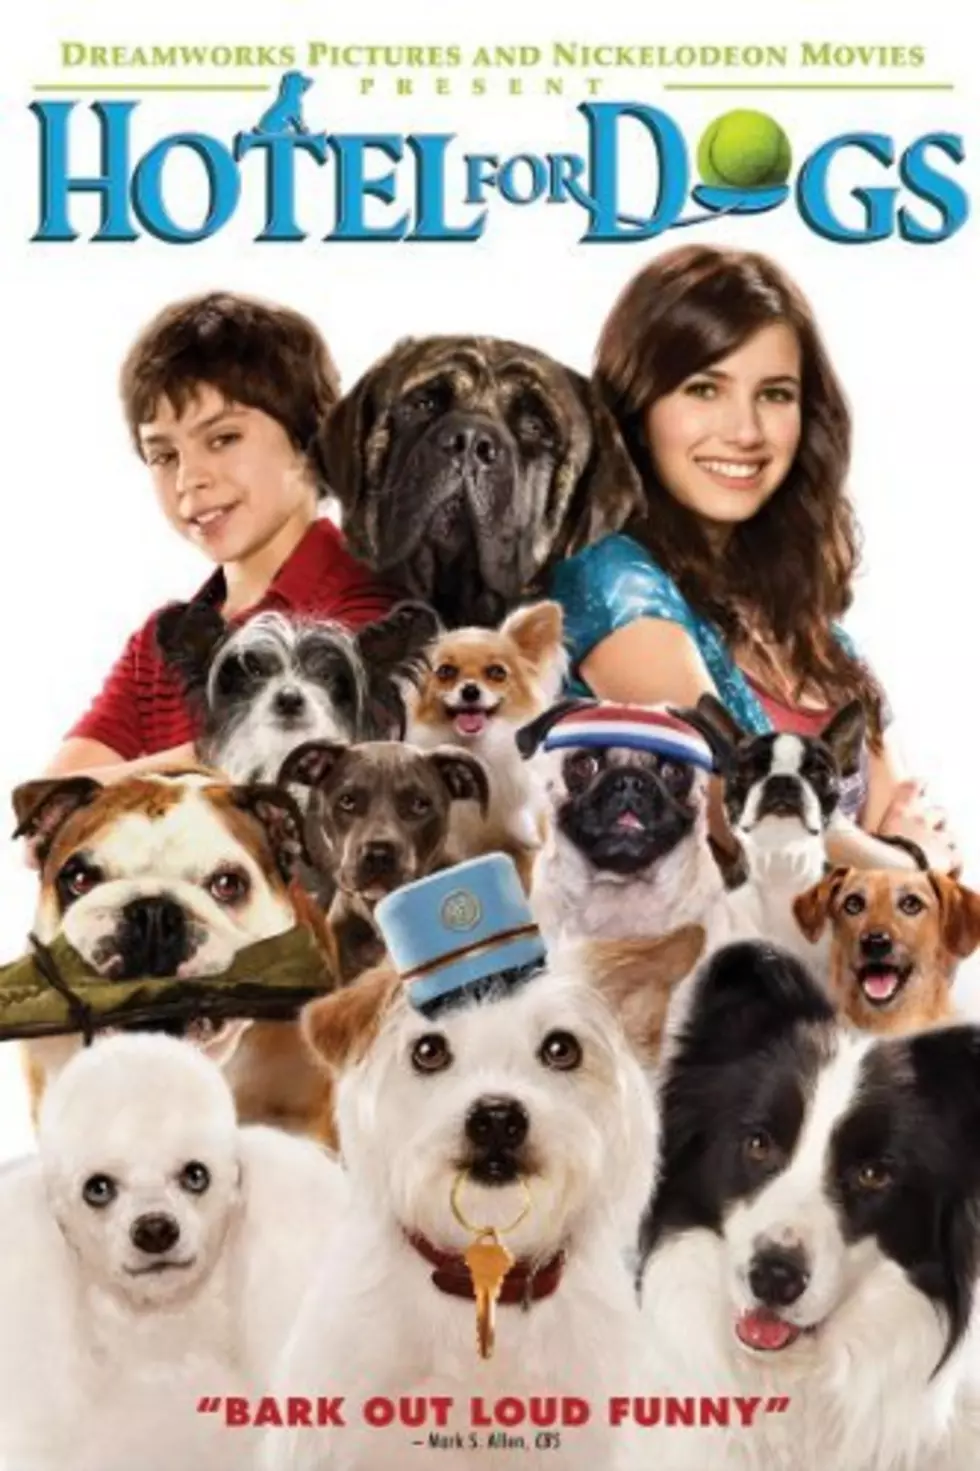 This Friday Night’s FREE Downtown Movie is “Hotel For Dogs”